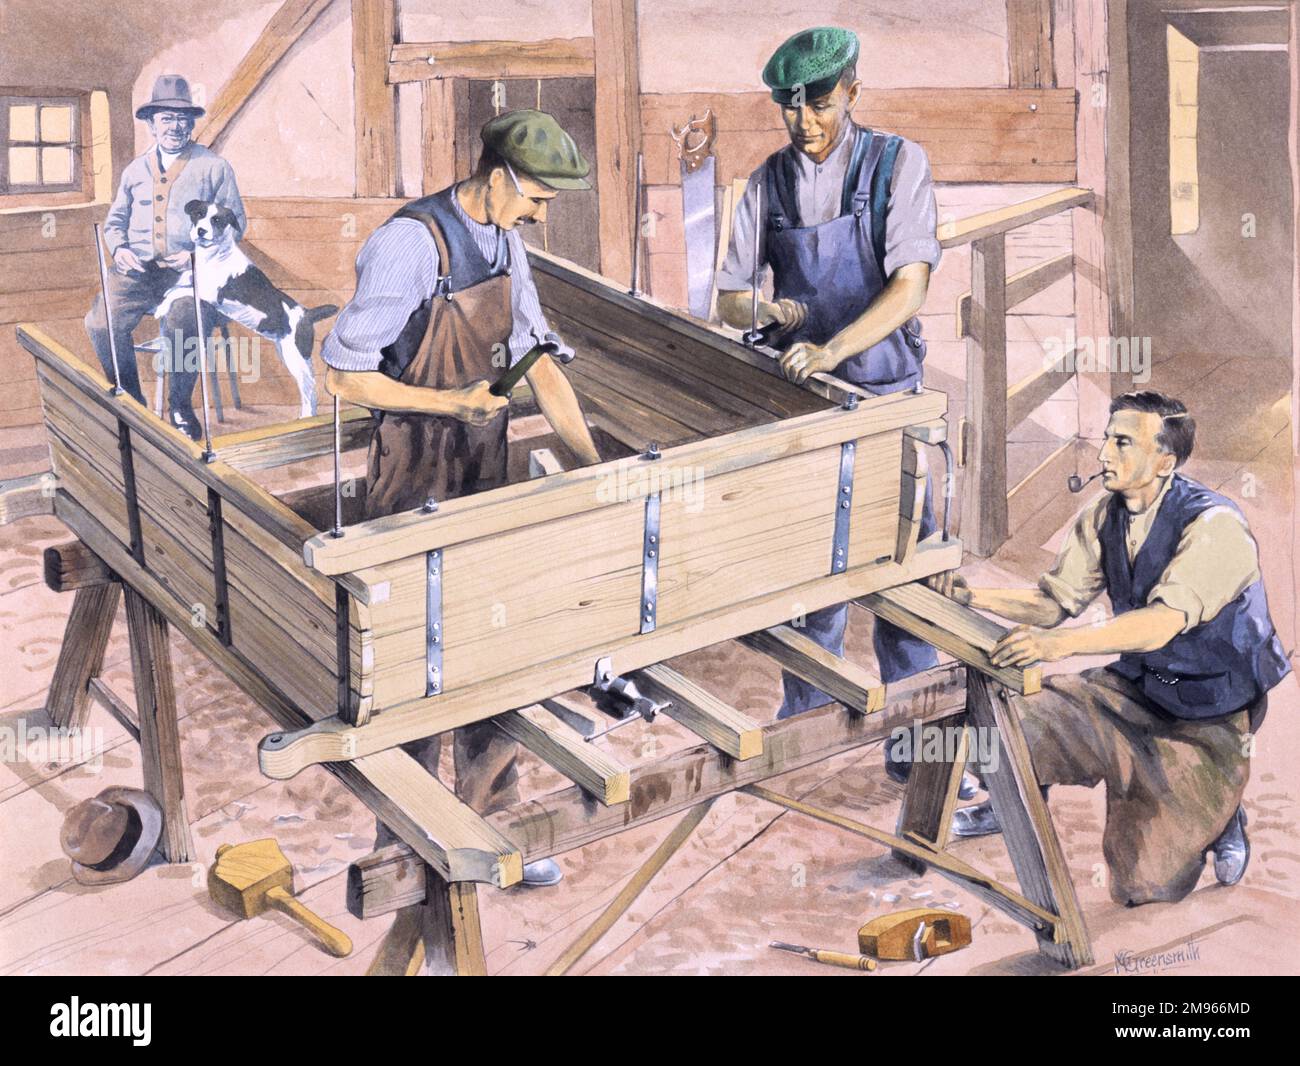 Three carpenters working on a wooden wagon, using traditional tools and techniques. Painting by Malcolm Greensmith Stock Photo